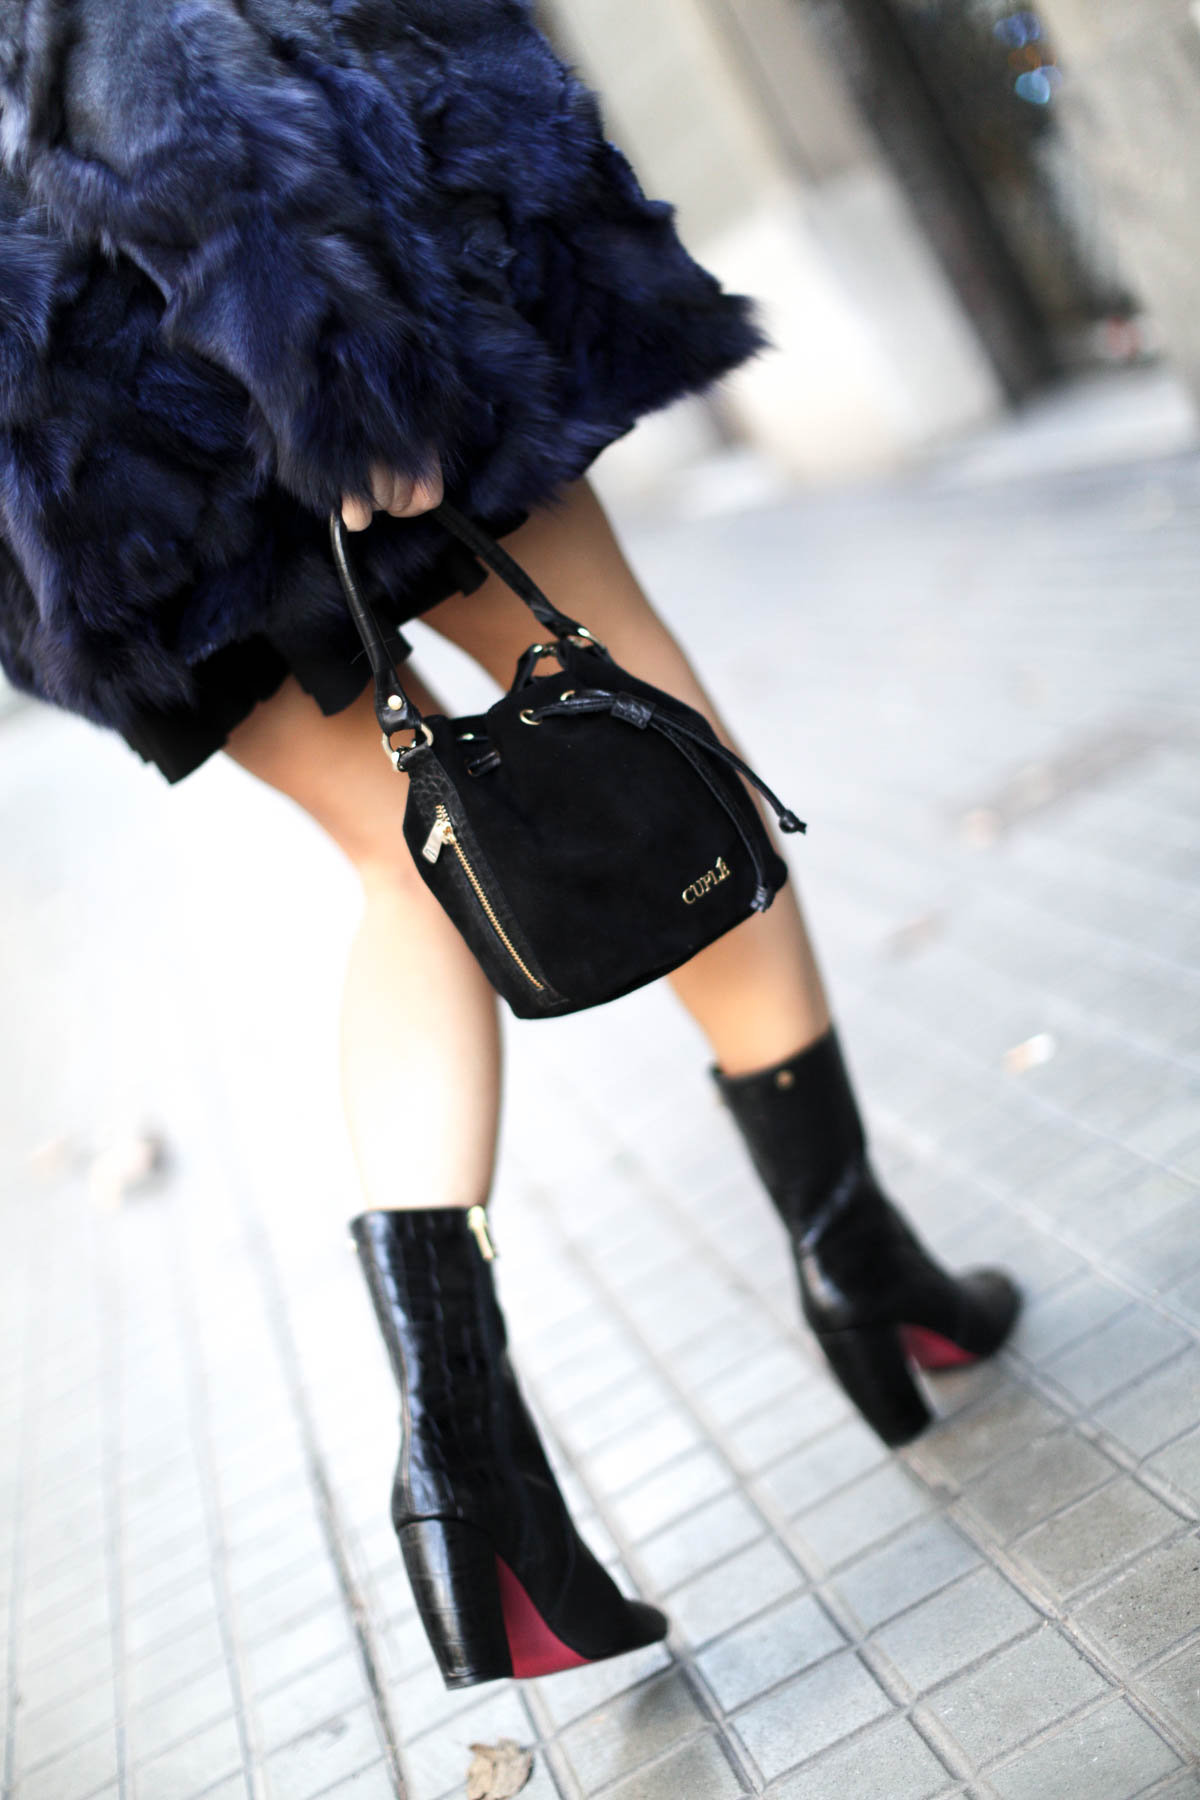 barcelona-fur-cuple-mini-skirt-ankle-boots-streetstyle-look-bartabac-outfit-moda-blogger-14